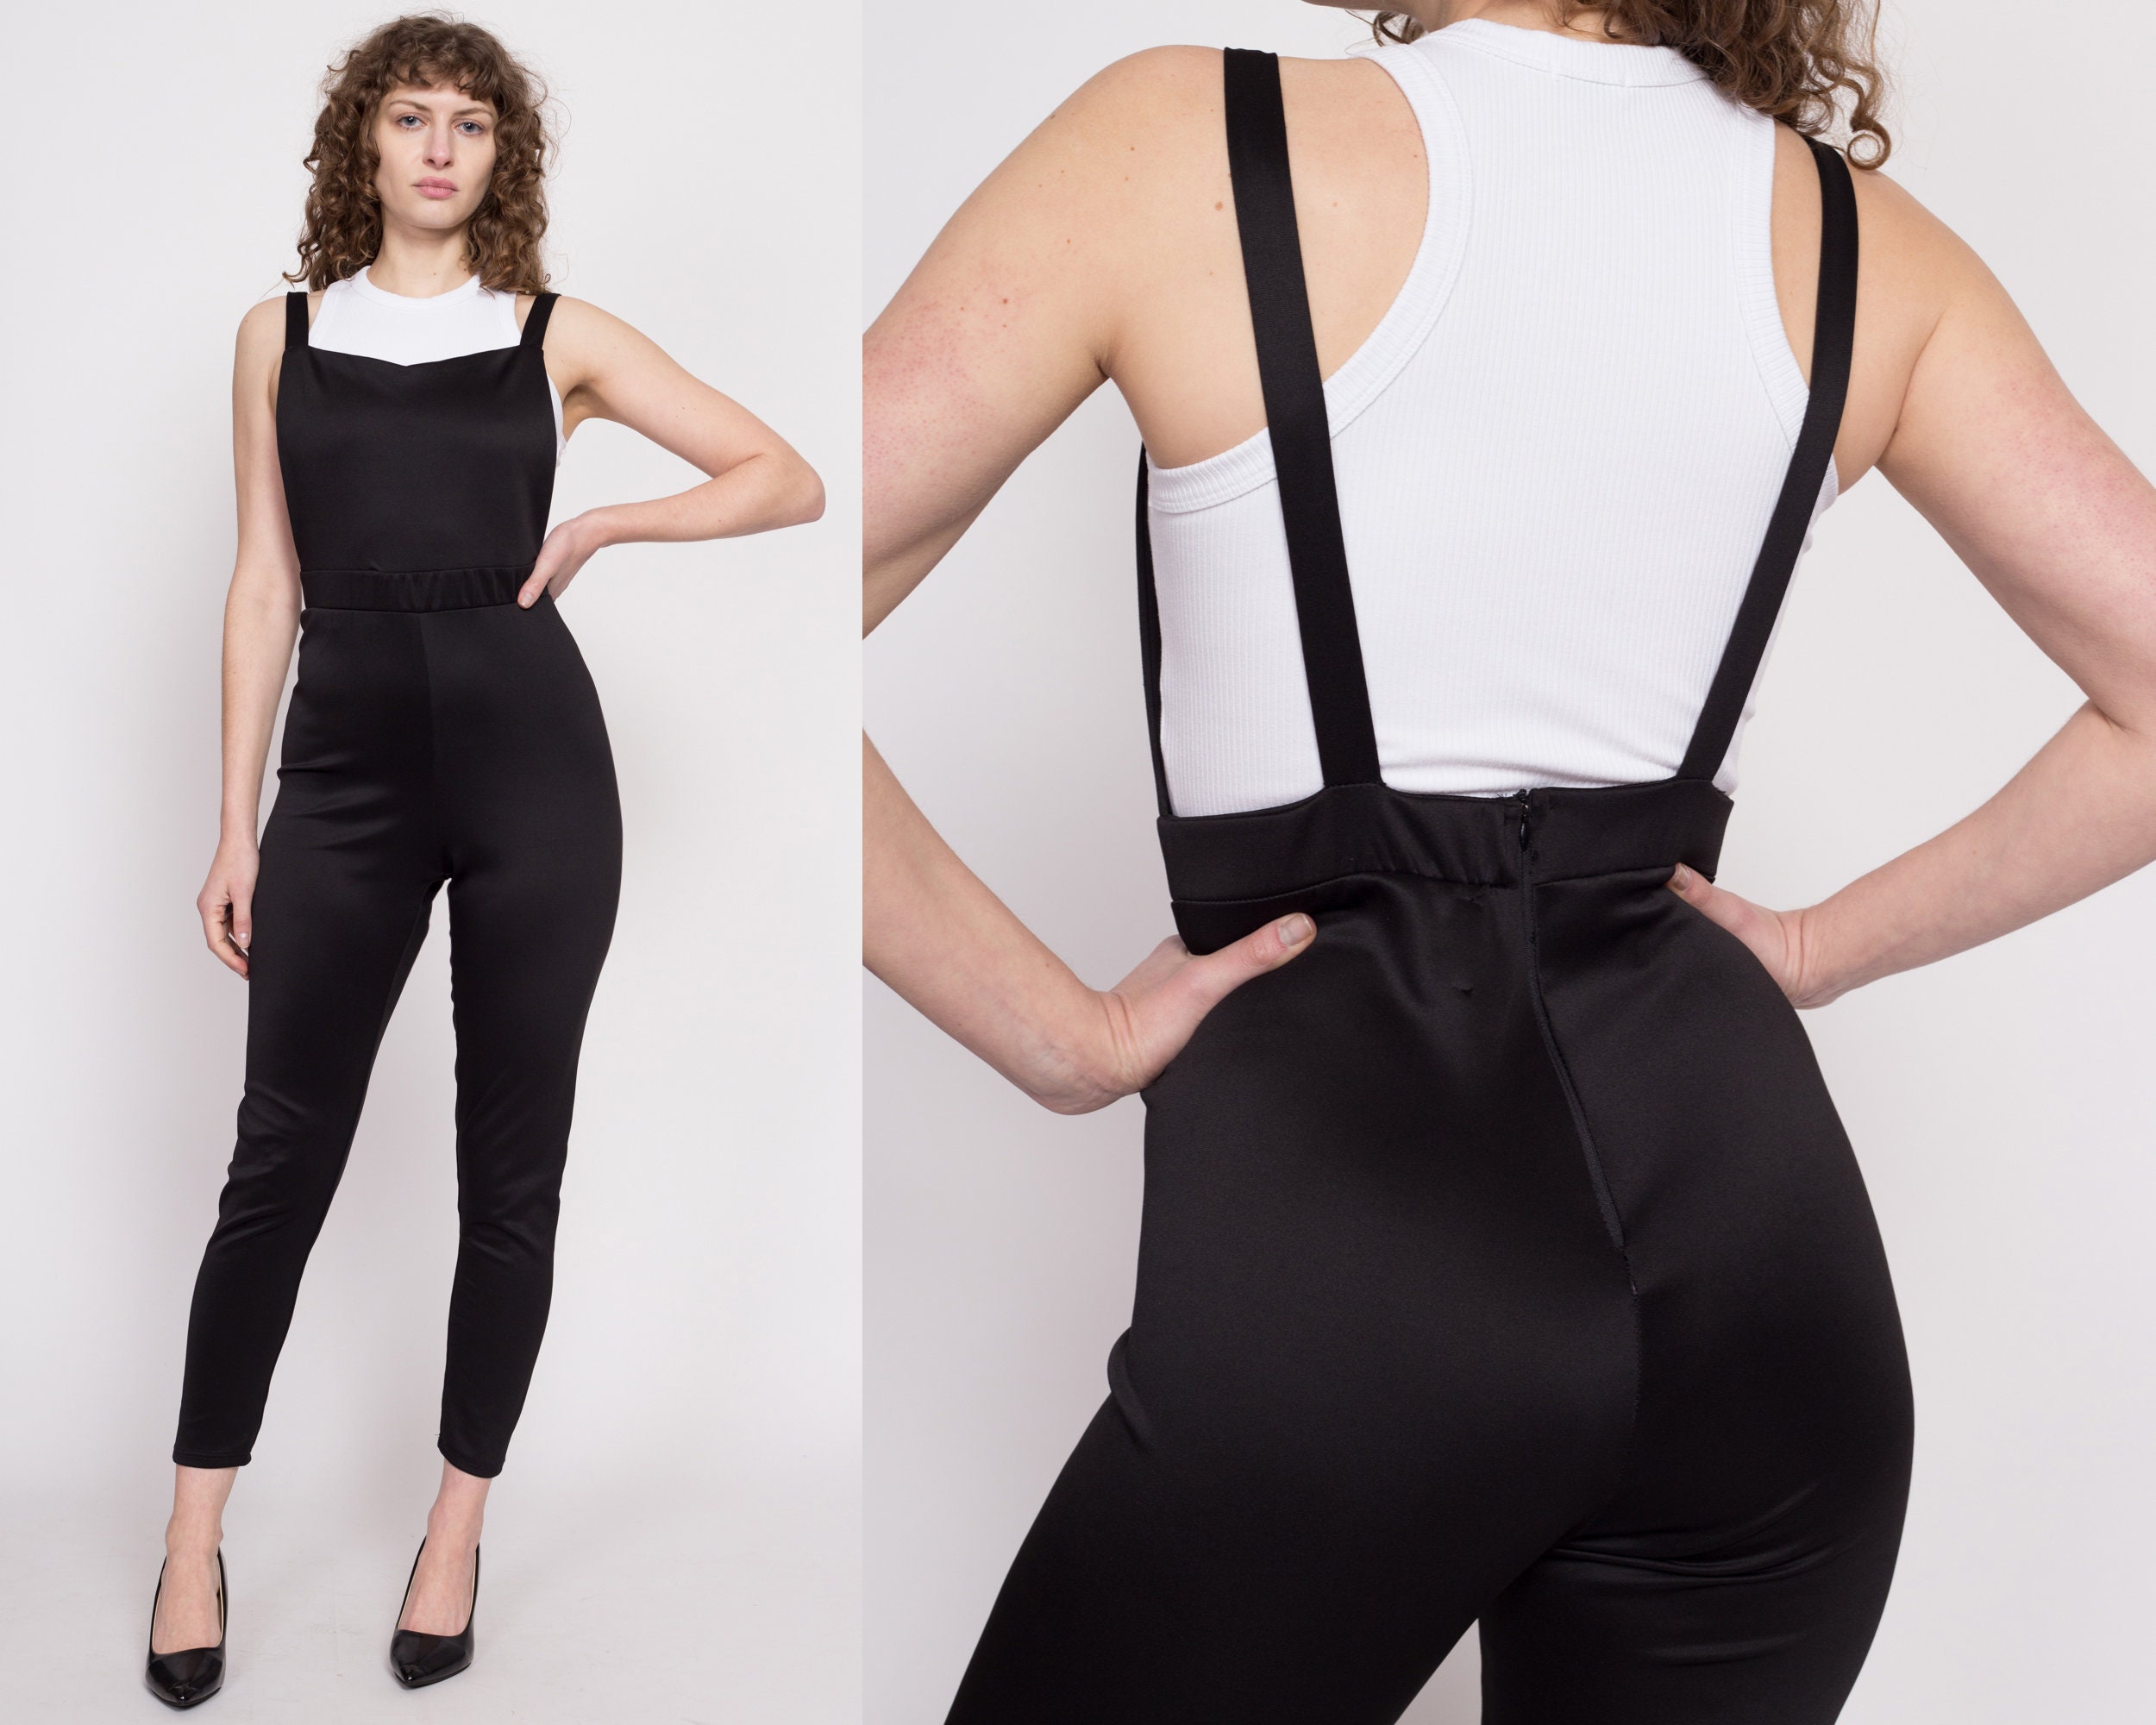 Shop Pinstriped Denim Suspender Pants for Women from latest collection at  Forever 21  432684